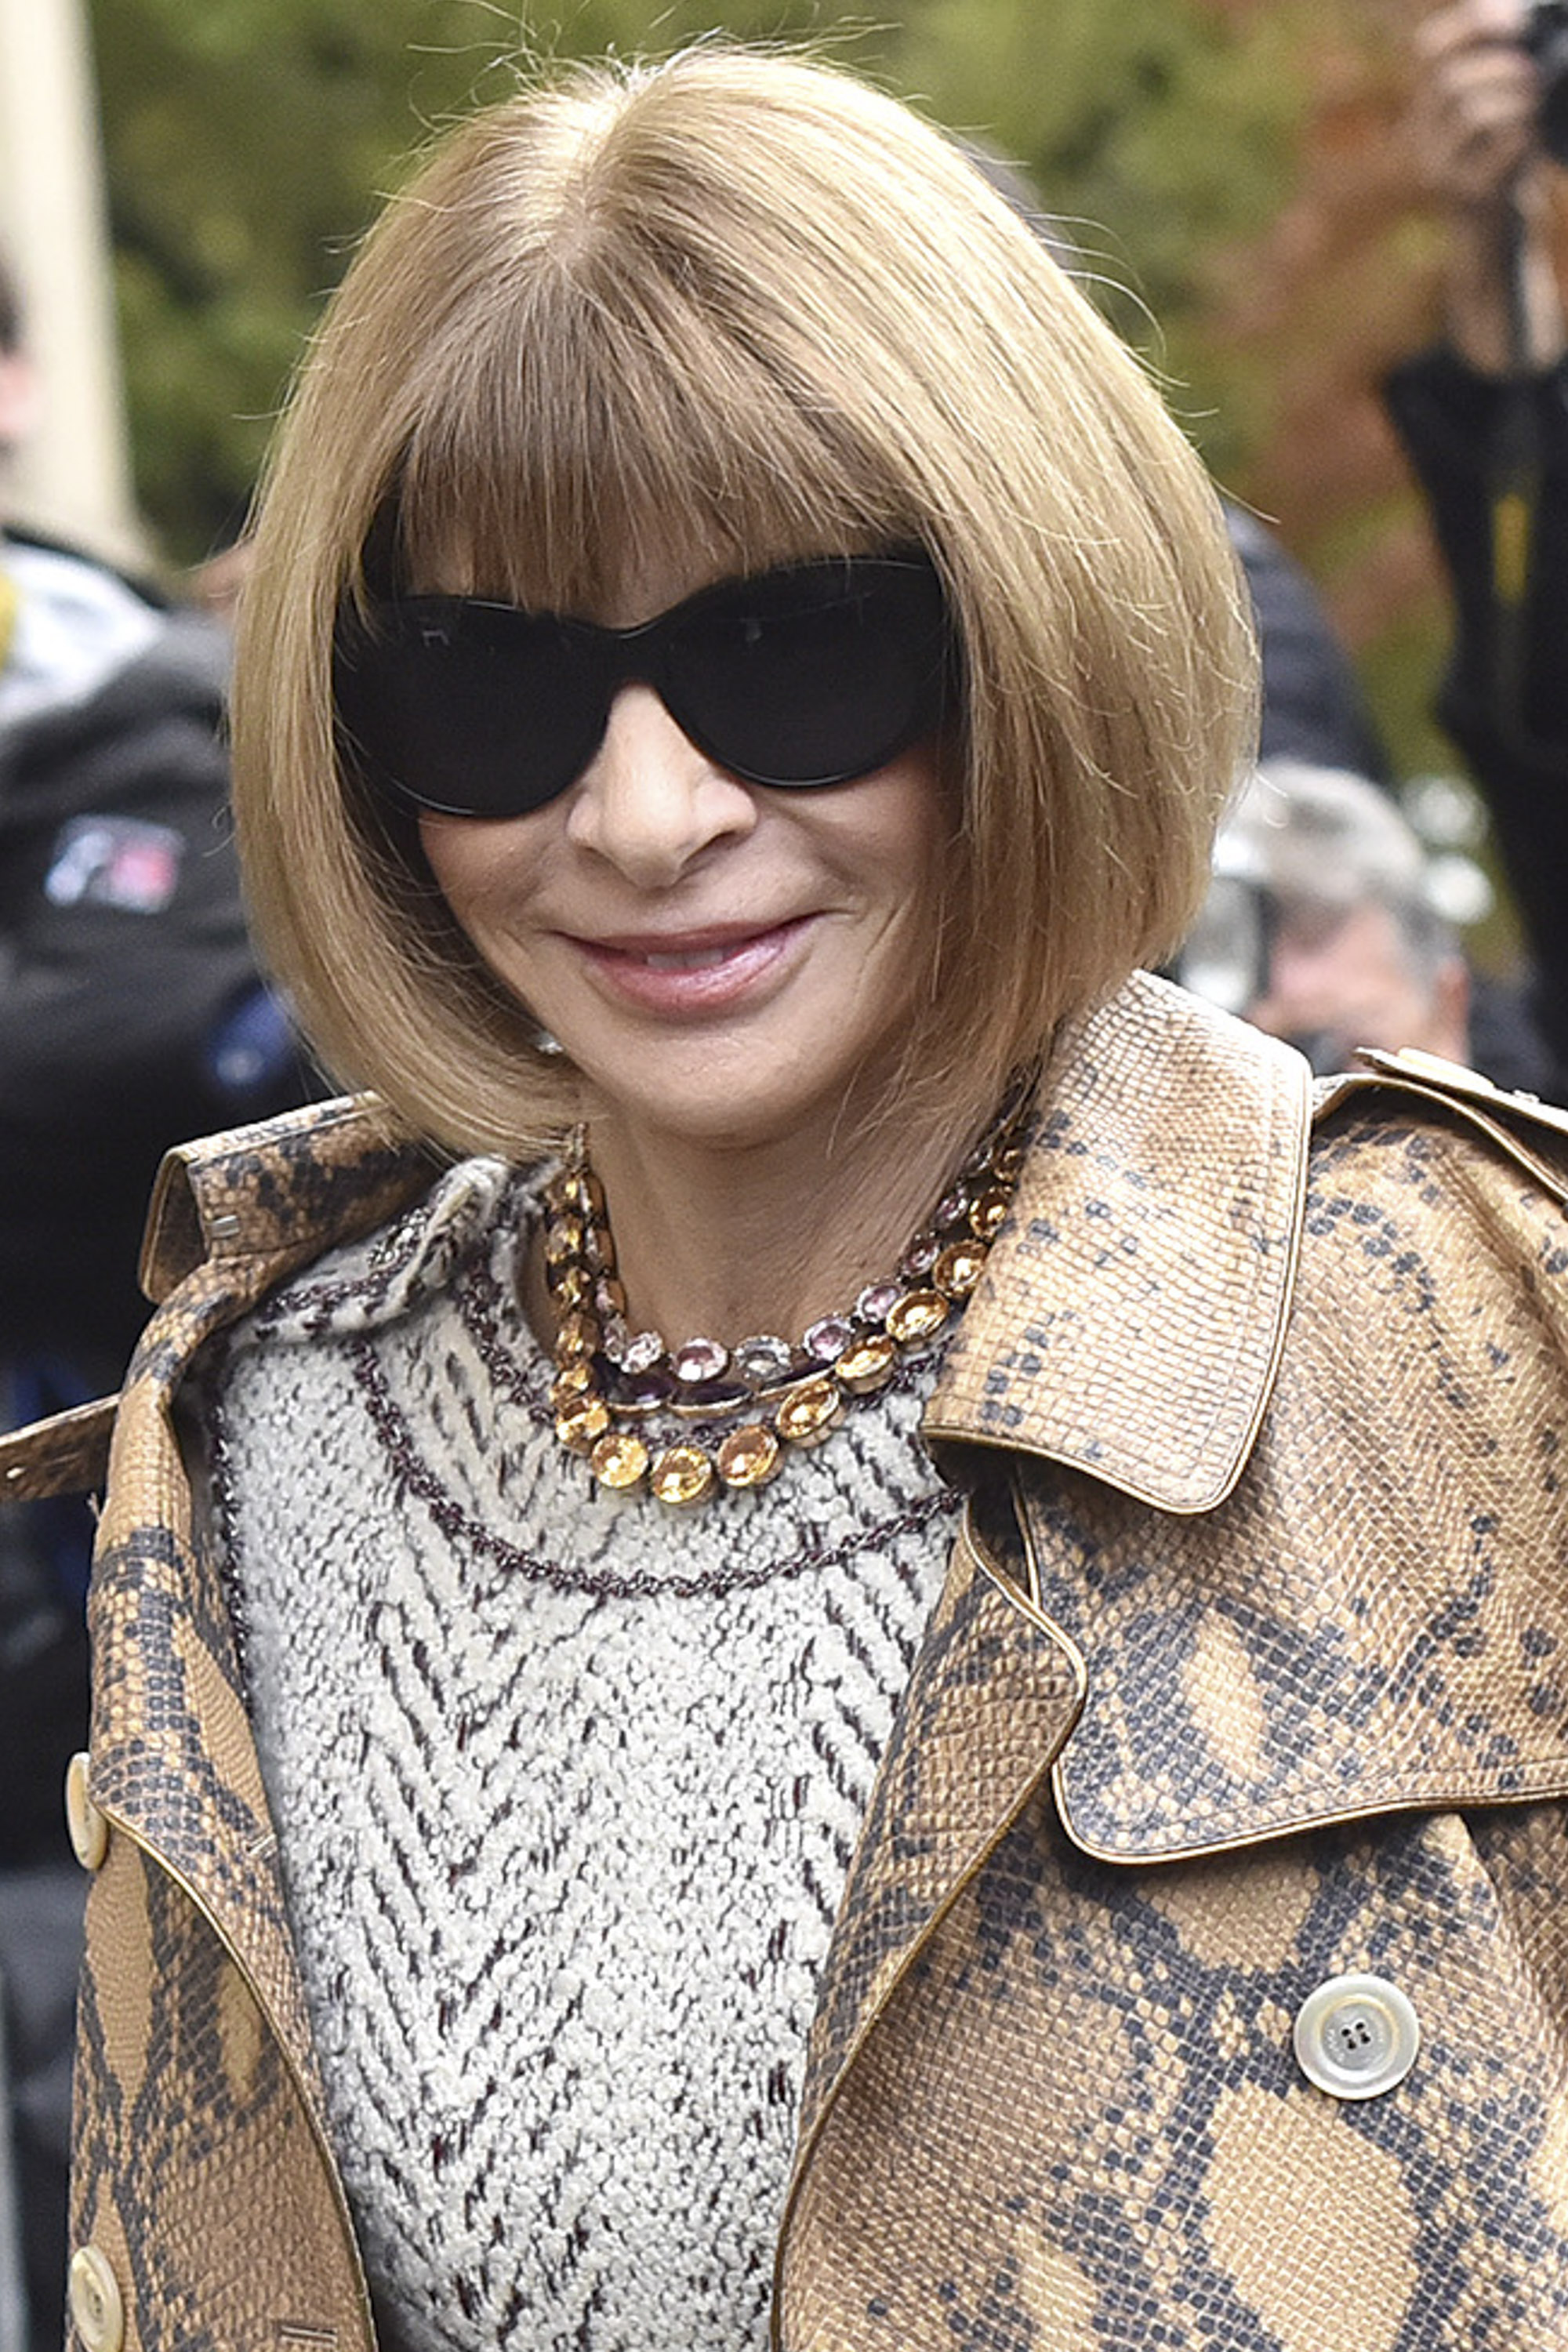 Anna Wintour at Chanel Fashion Show during the Paris Fashion Week S/S 2016 on Oct. 6, 2015.